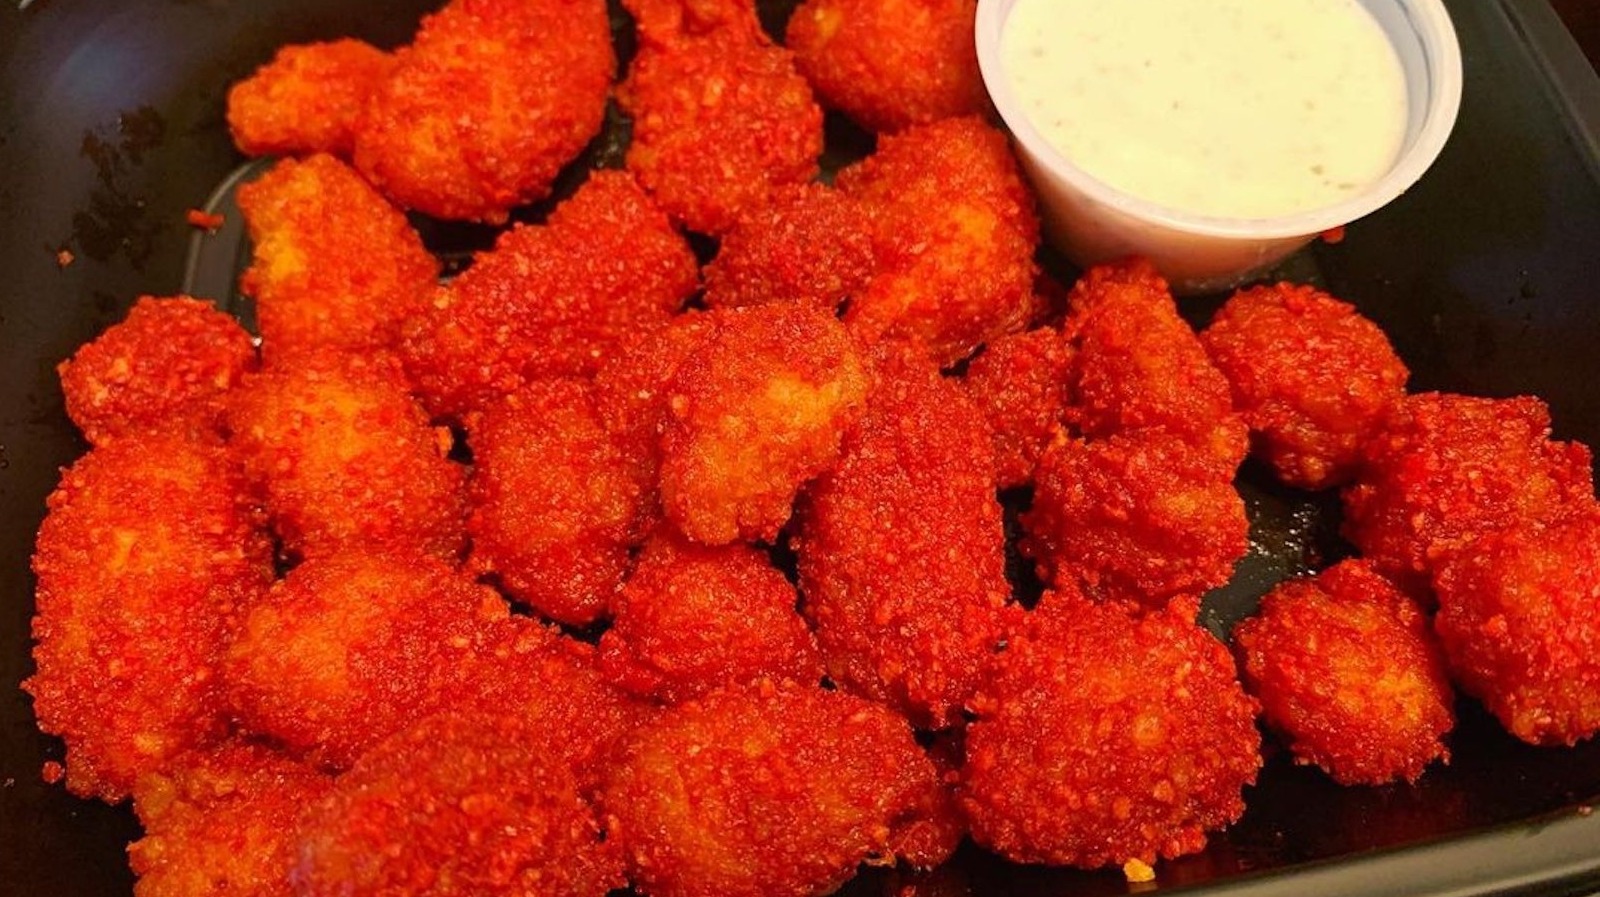 Applebee's Just Dropped 2 Spicy Cheetos Menu Items